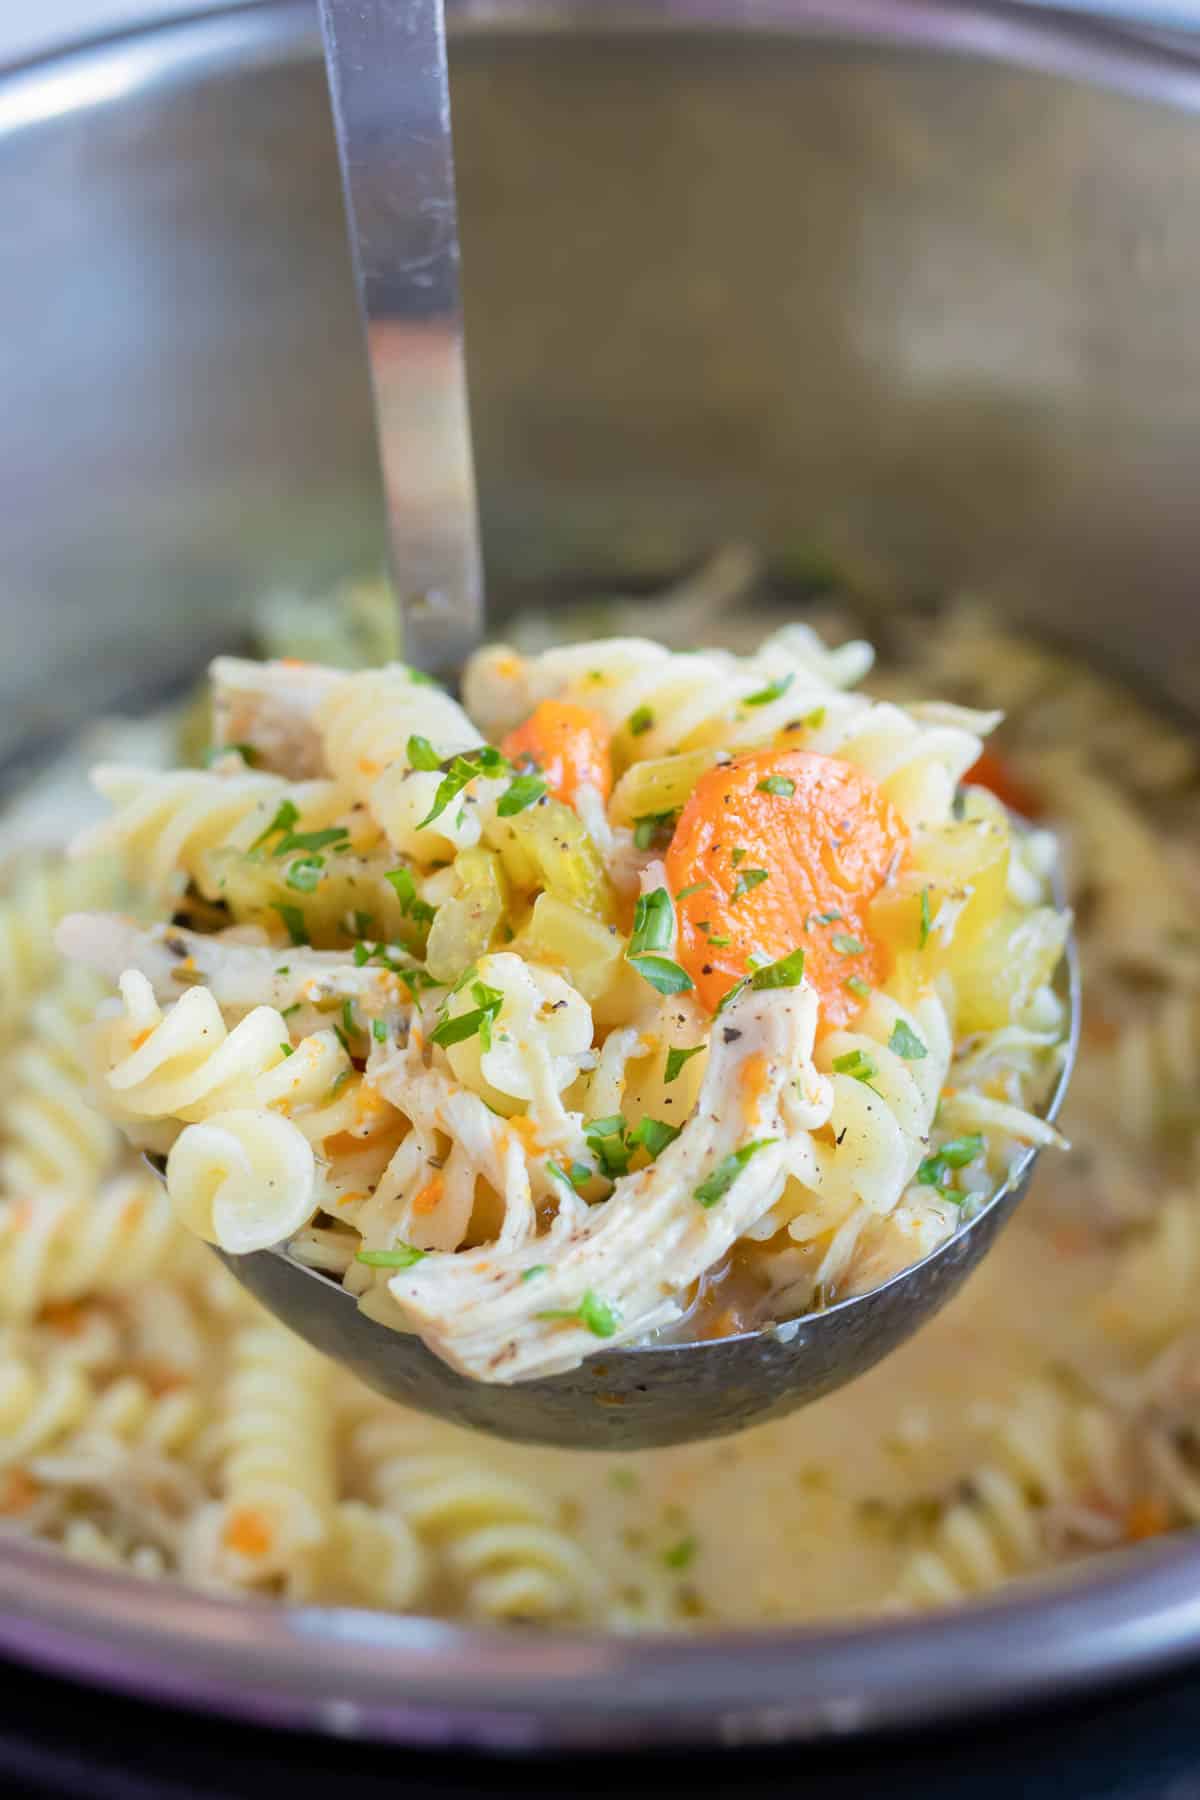 Pressure cooker chicken noodle soup is served with a metal ladle.